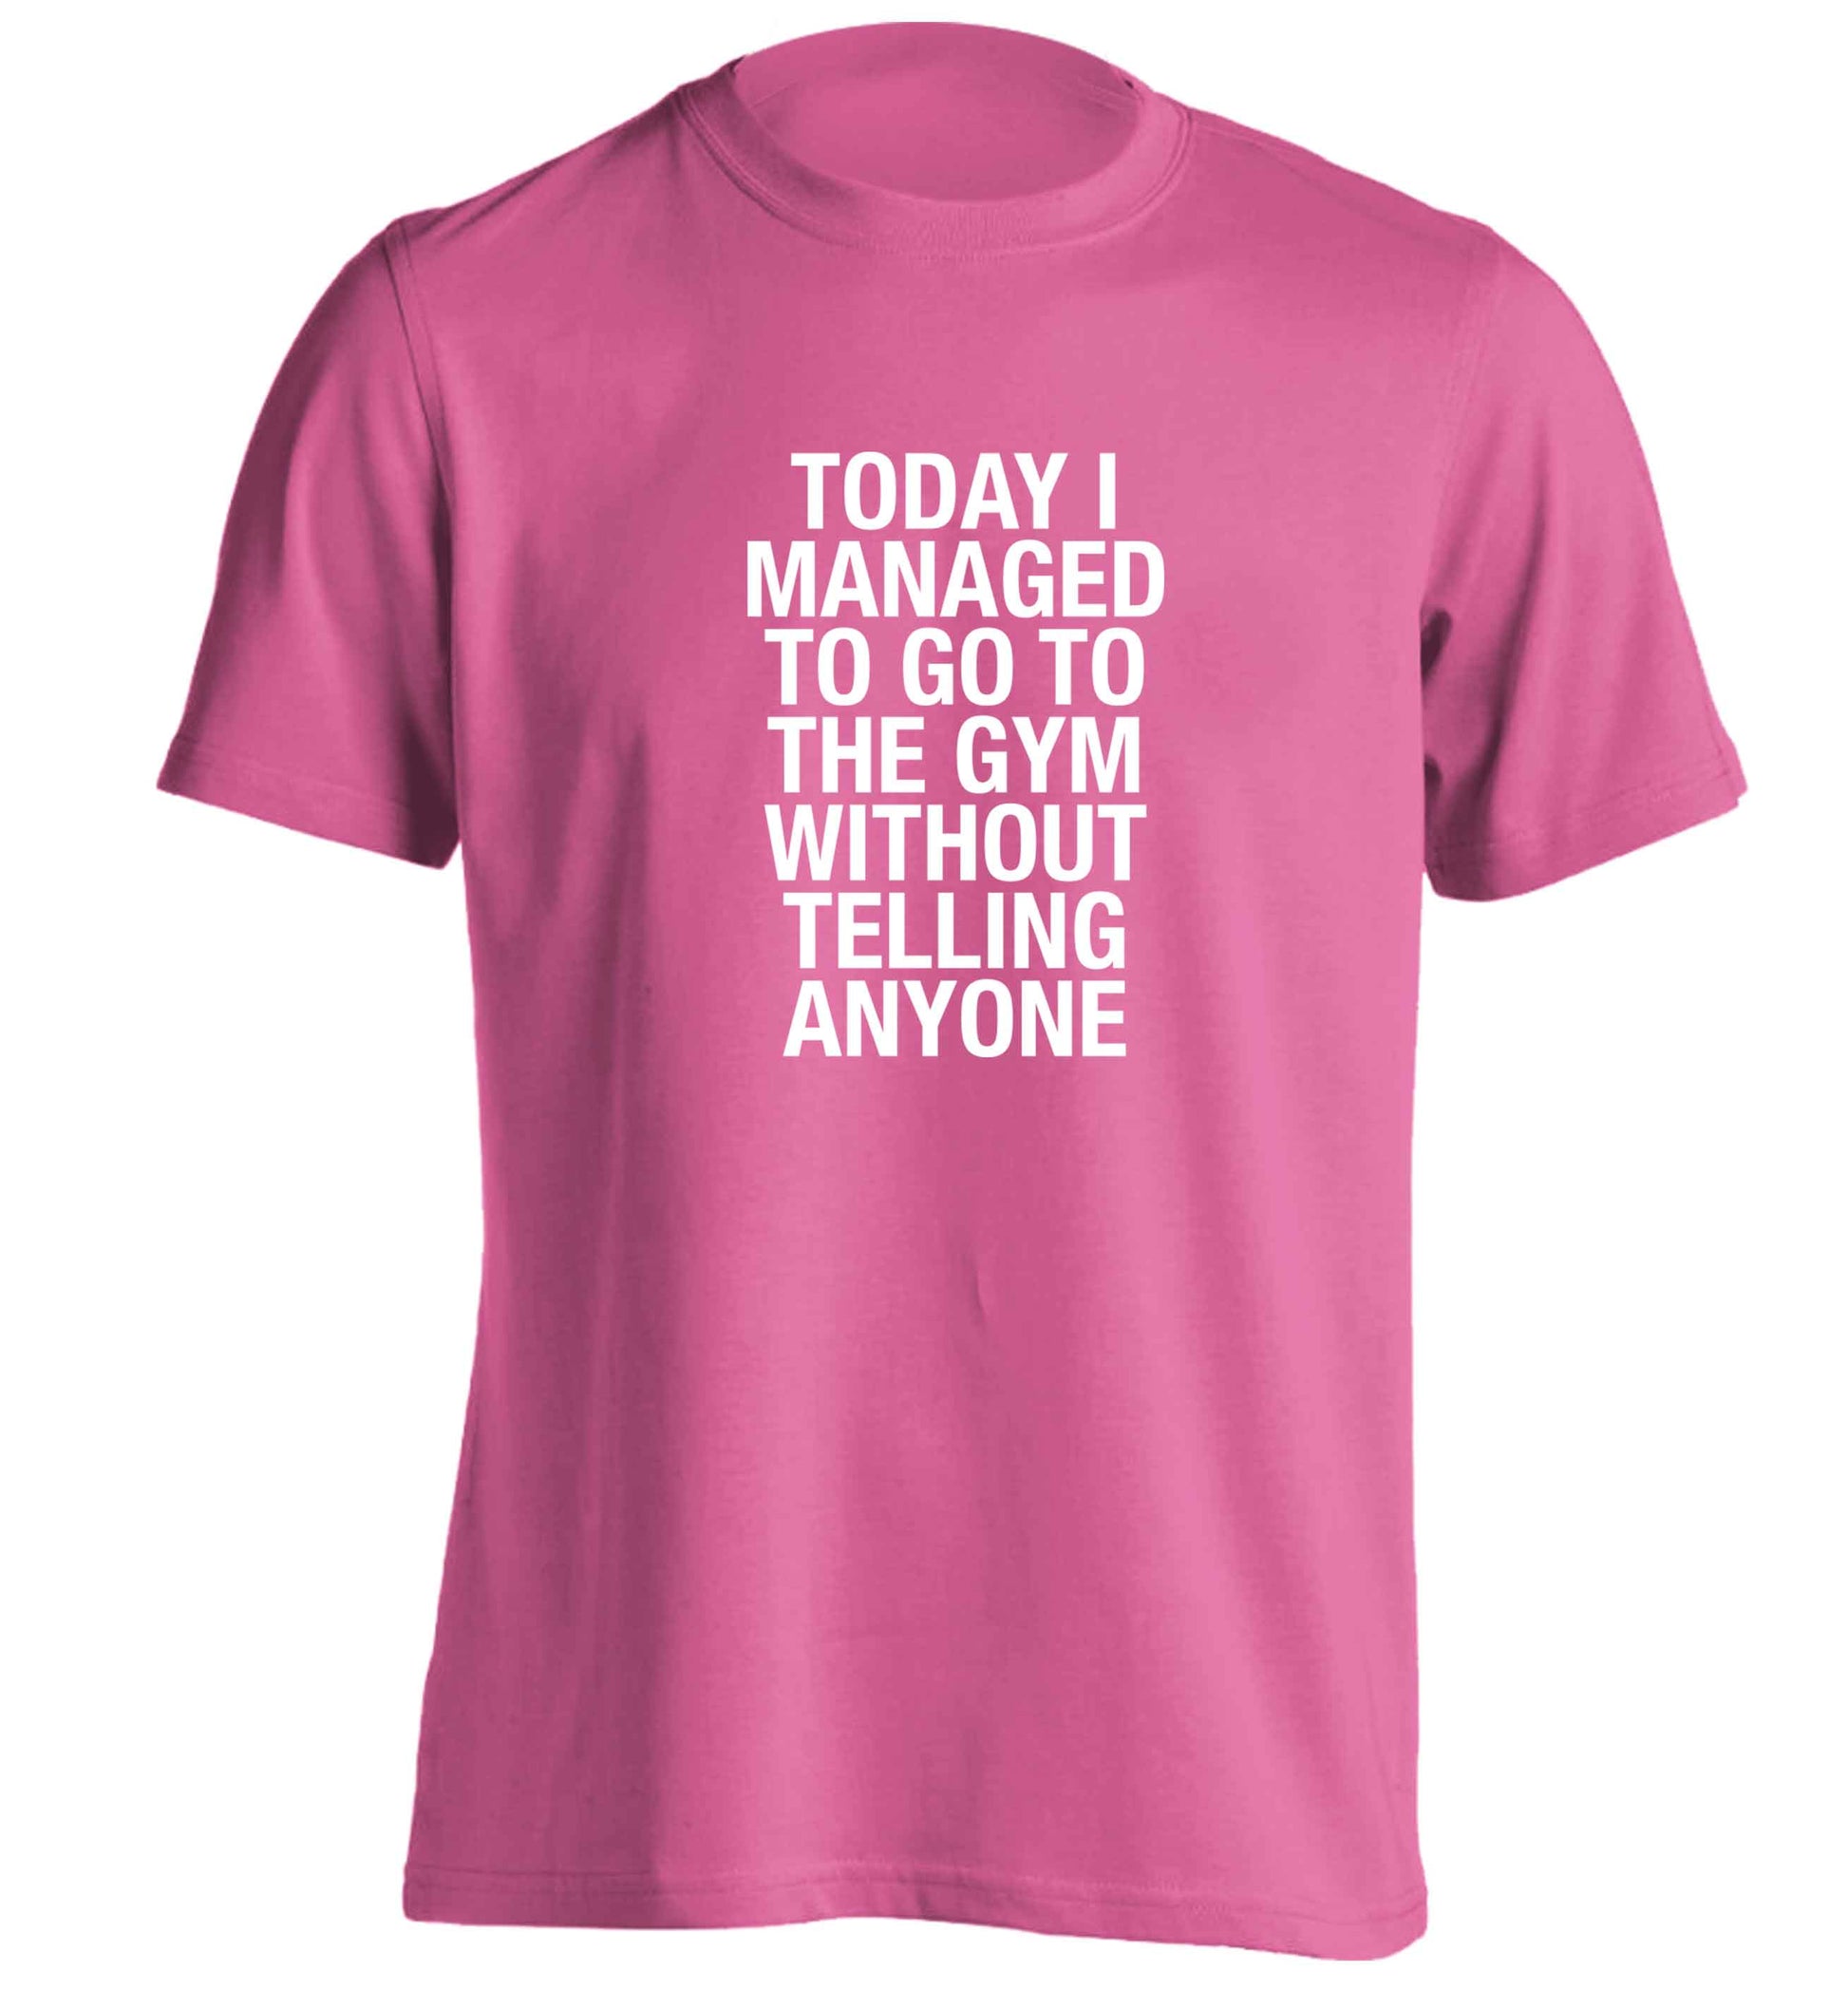 Today I managed to go to the gym without telling anyone adults unisex pink Tshirt 2XL